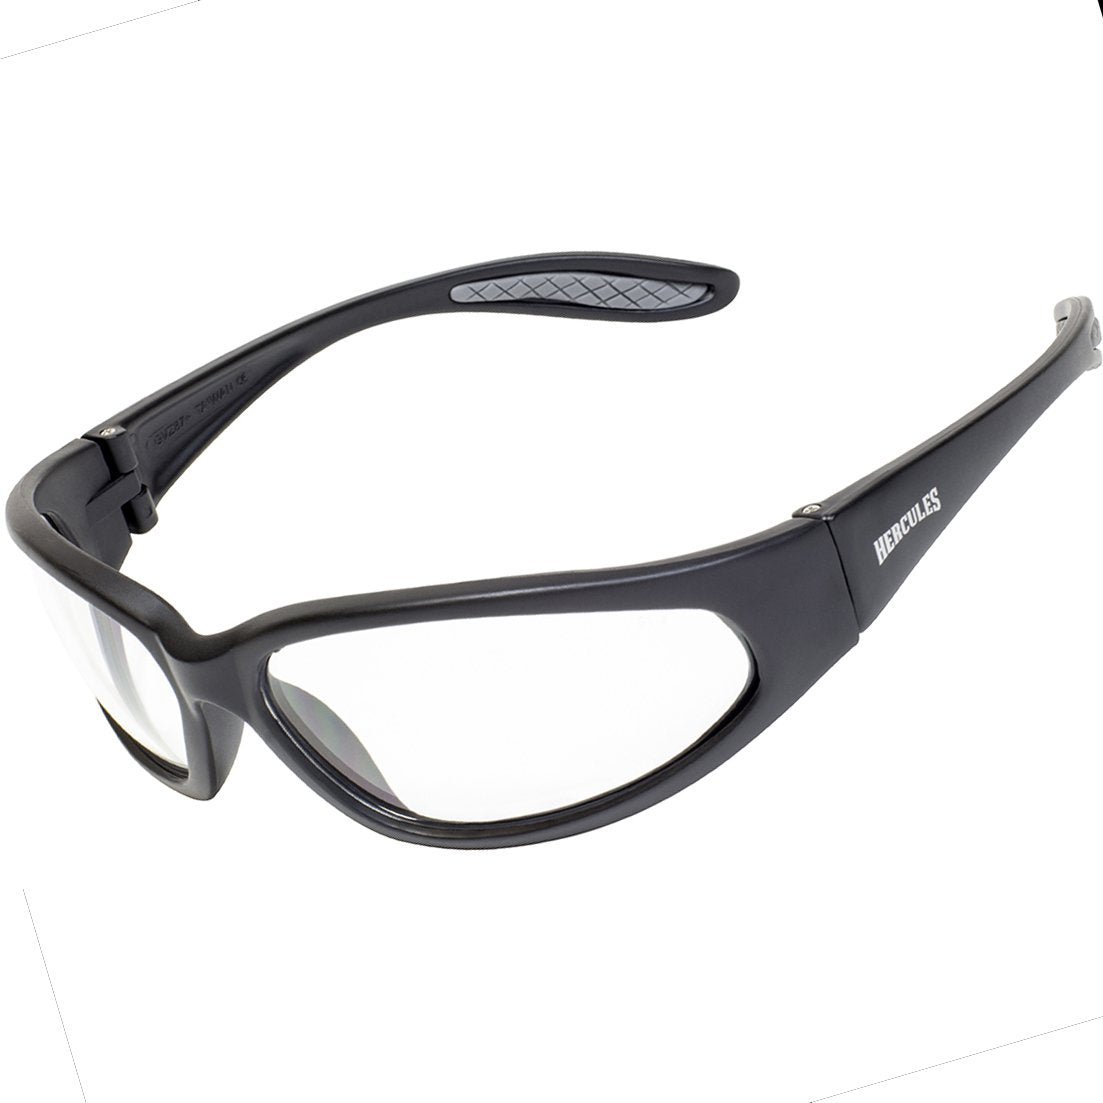 Hercules Bifocal Safety Glasses with Various Frame and Lens Options